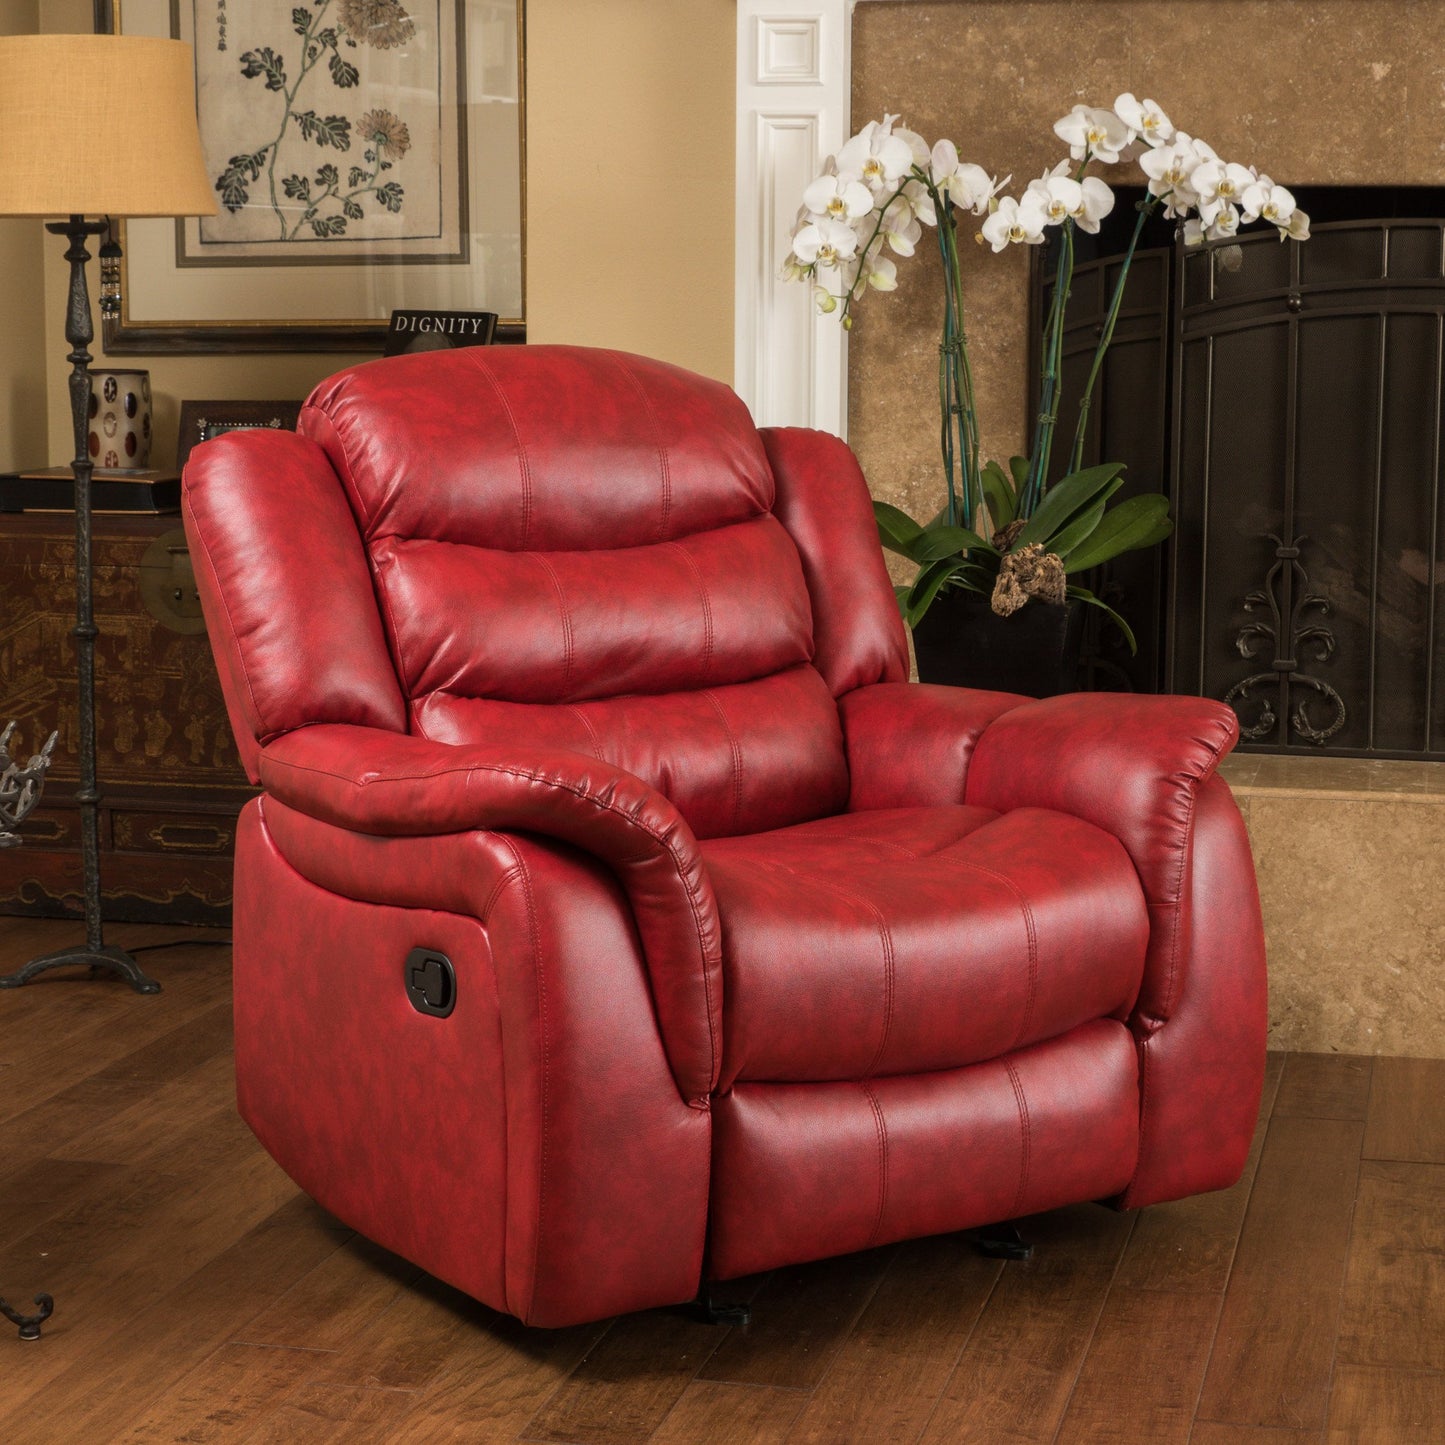 Hidal Contemporary Red Glider Recliner Chair